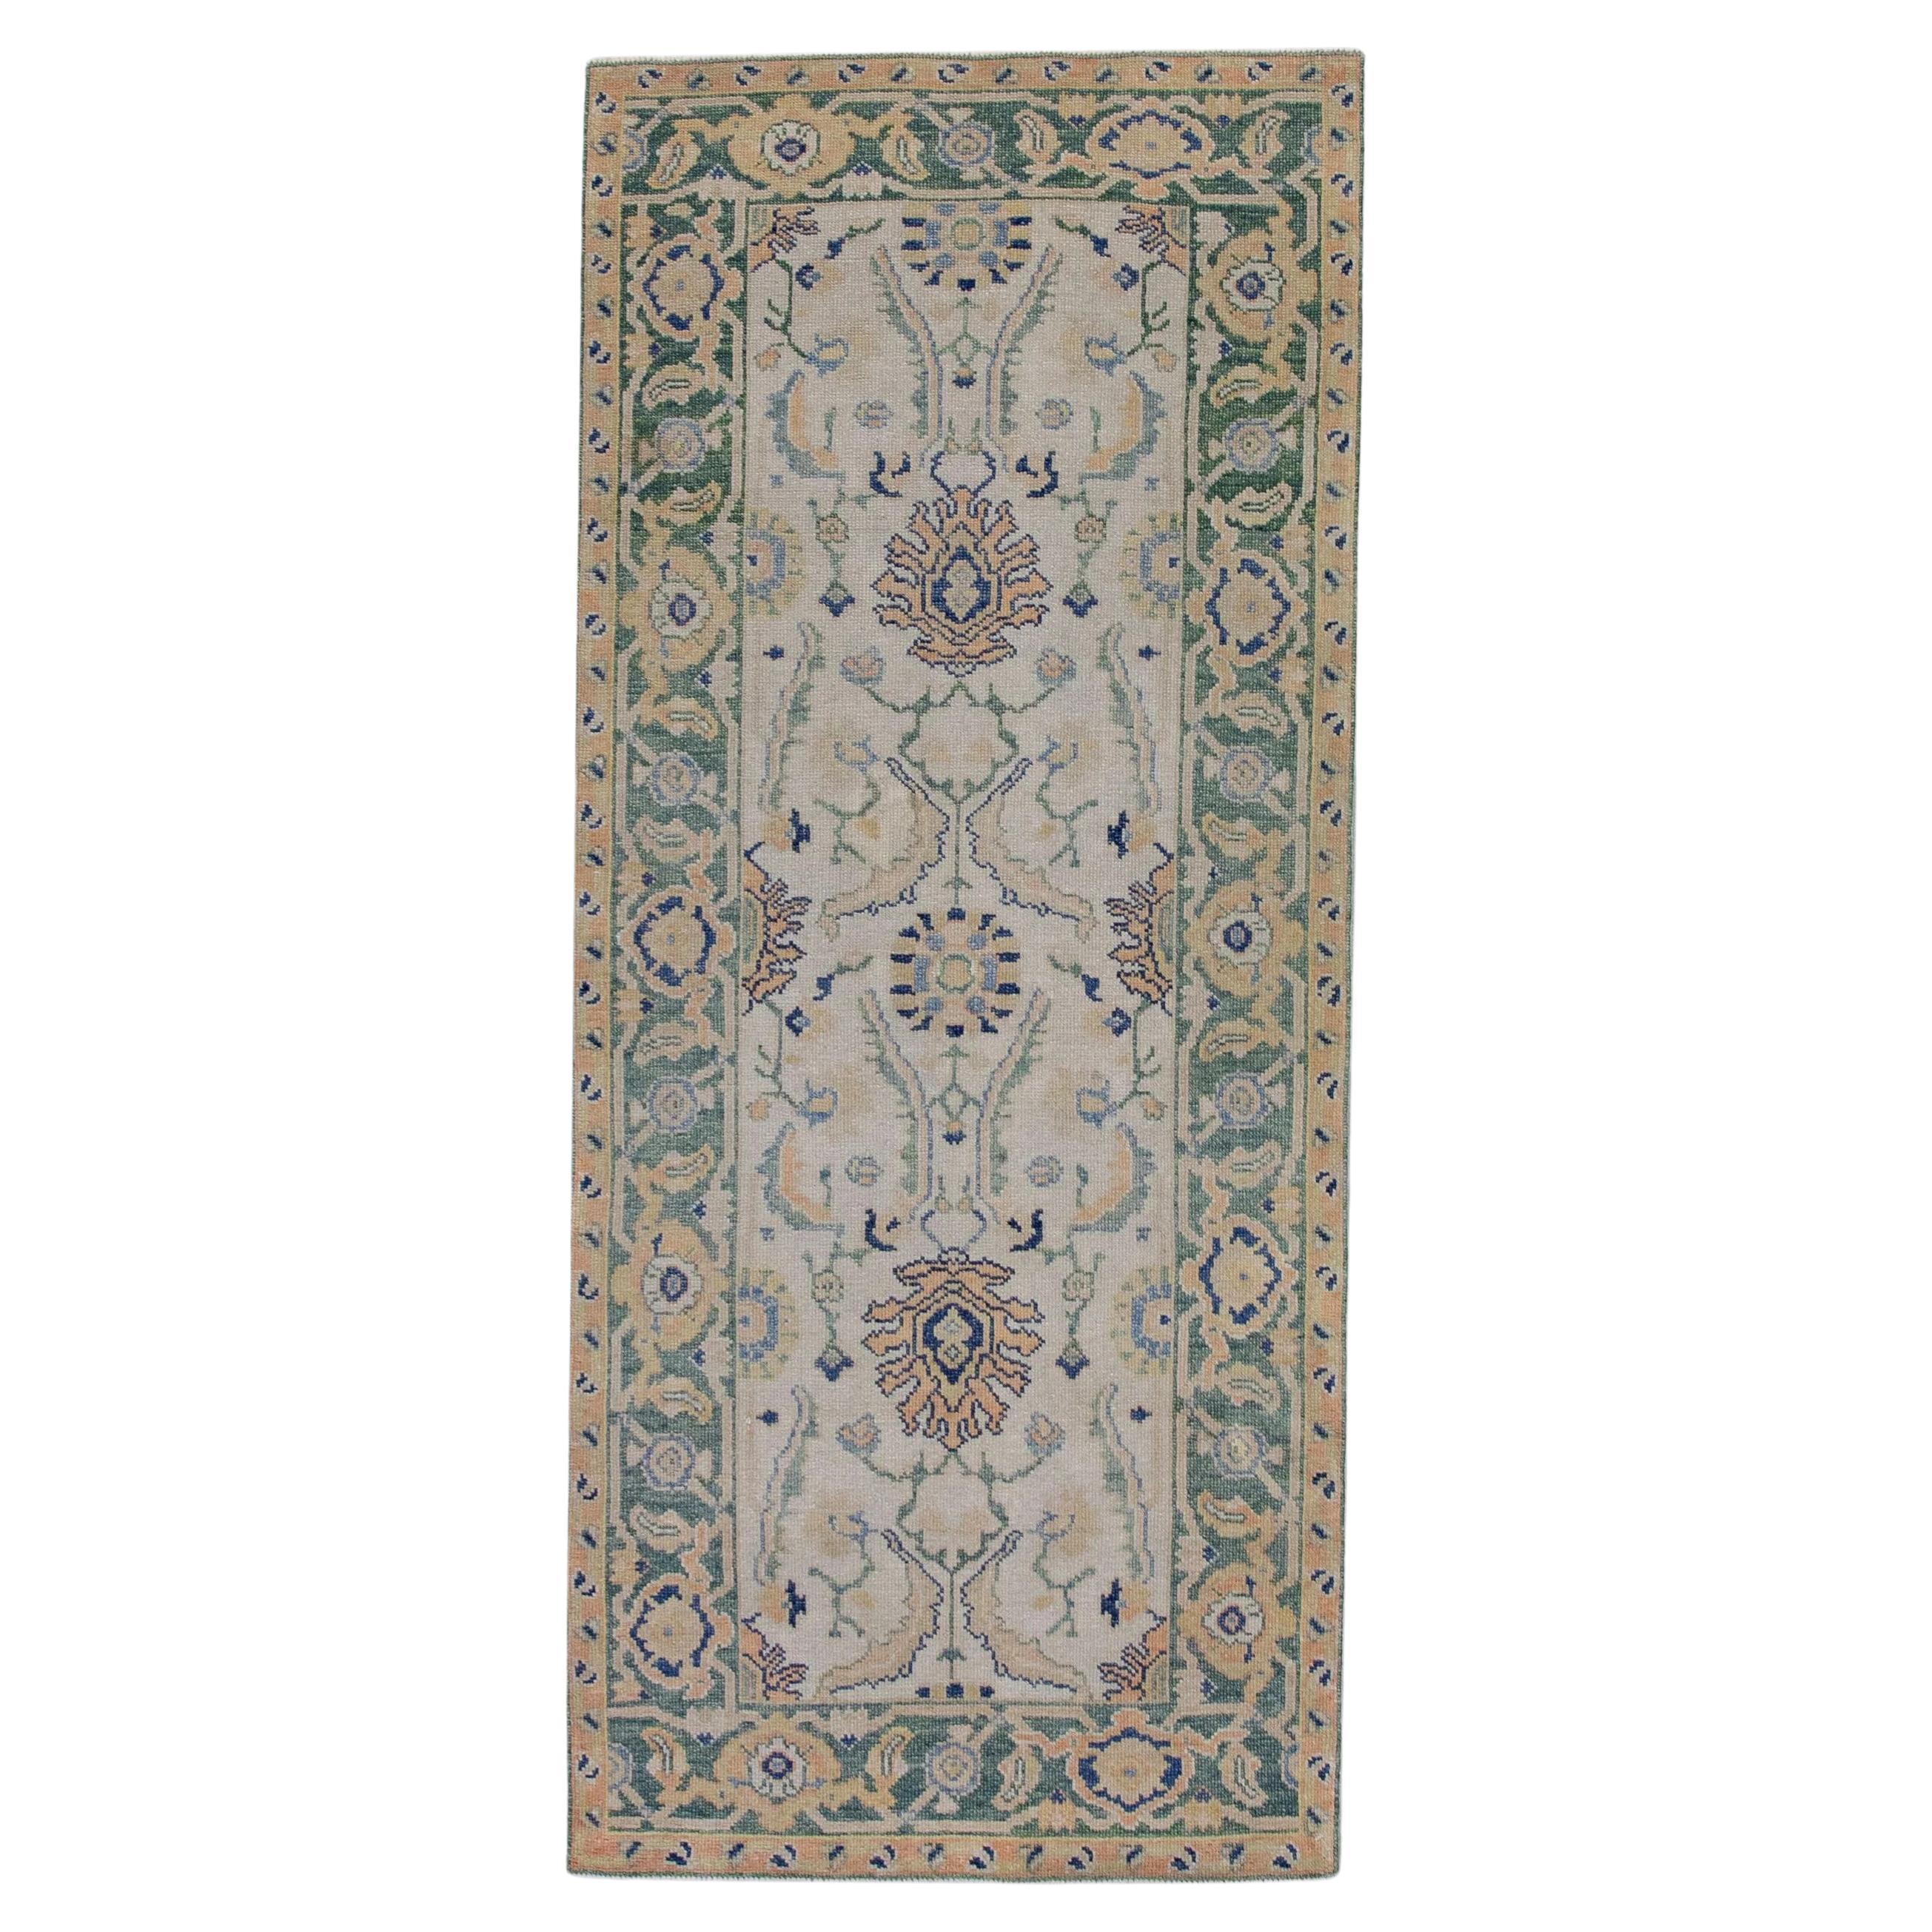 Floral Turkish Finewoven Wool Oushak Rug in Green and Yellow 2'8" x 5'11"